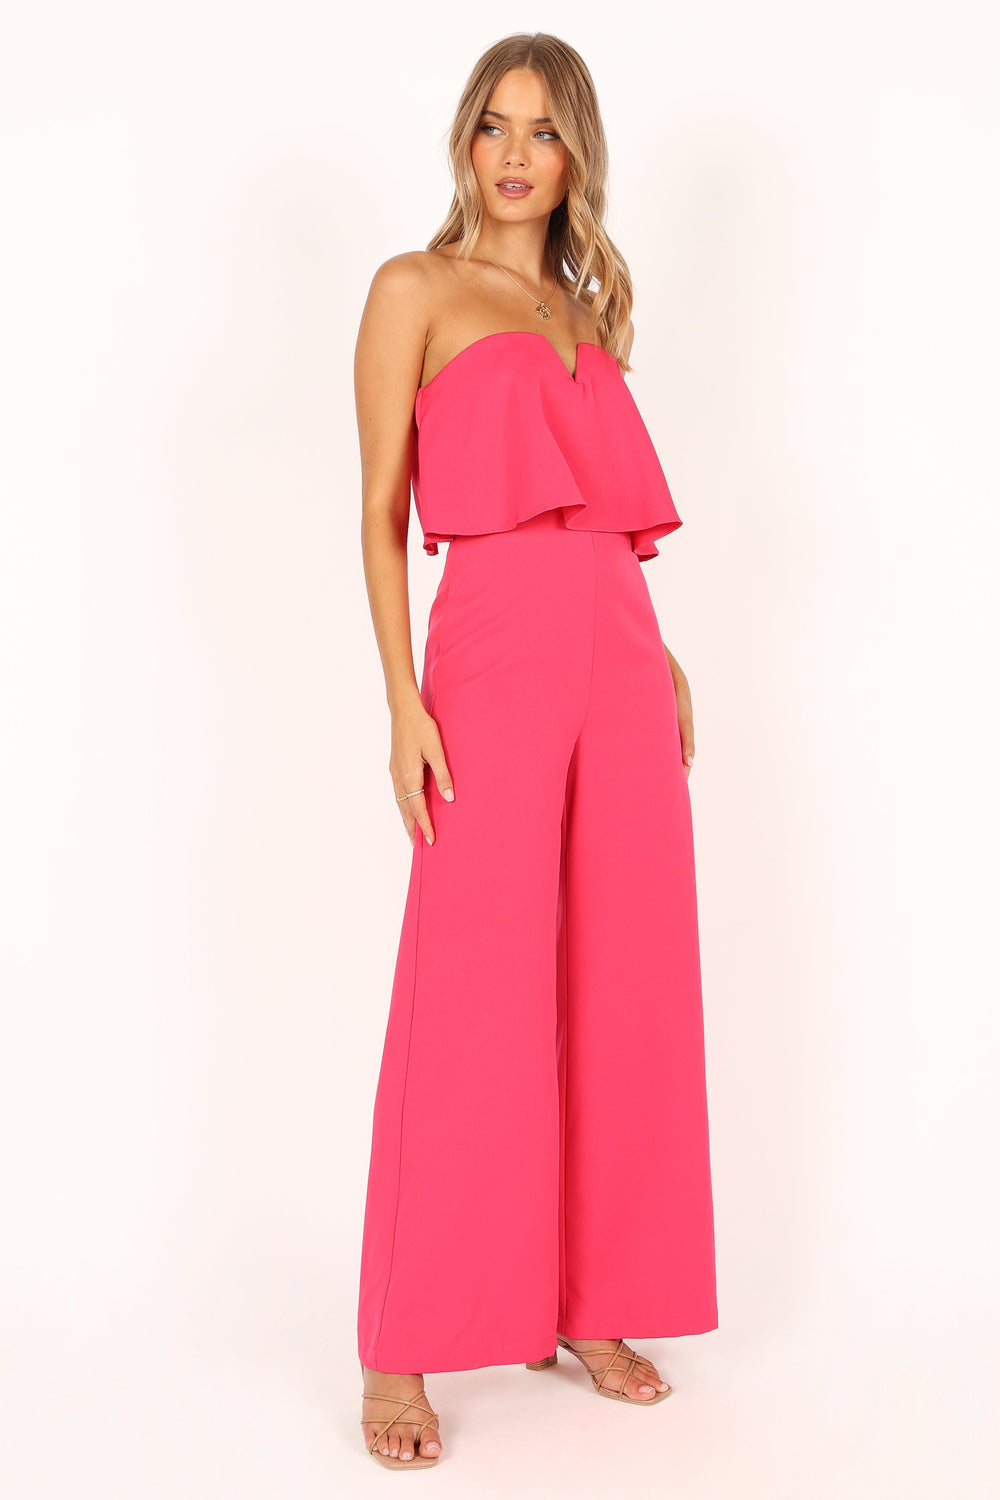 Petal and Pup USA Rompers Sonny Strapless Jumpsuit - Hot Pink